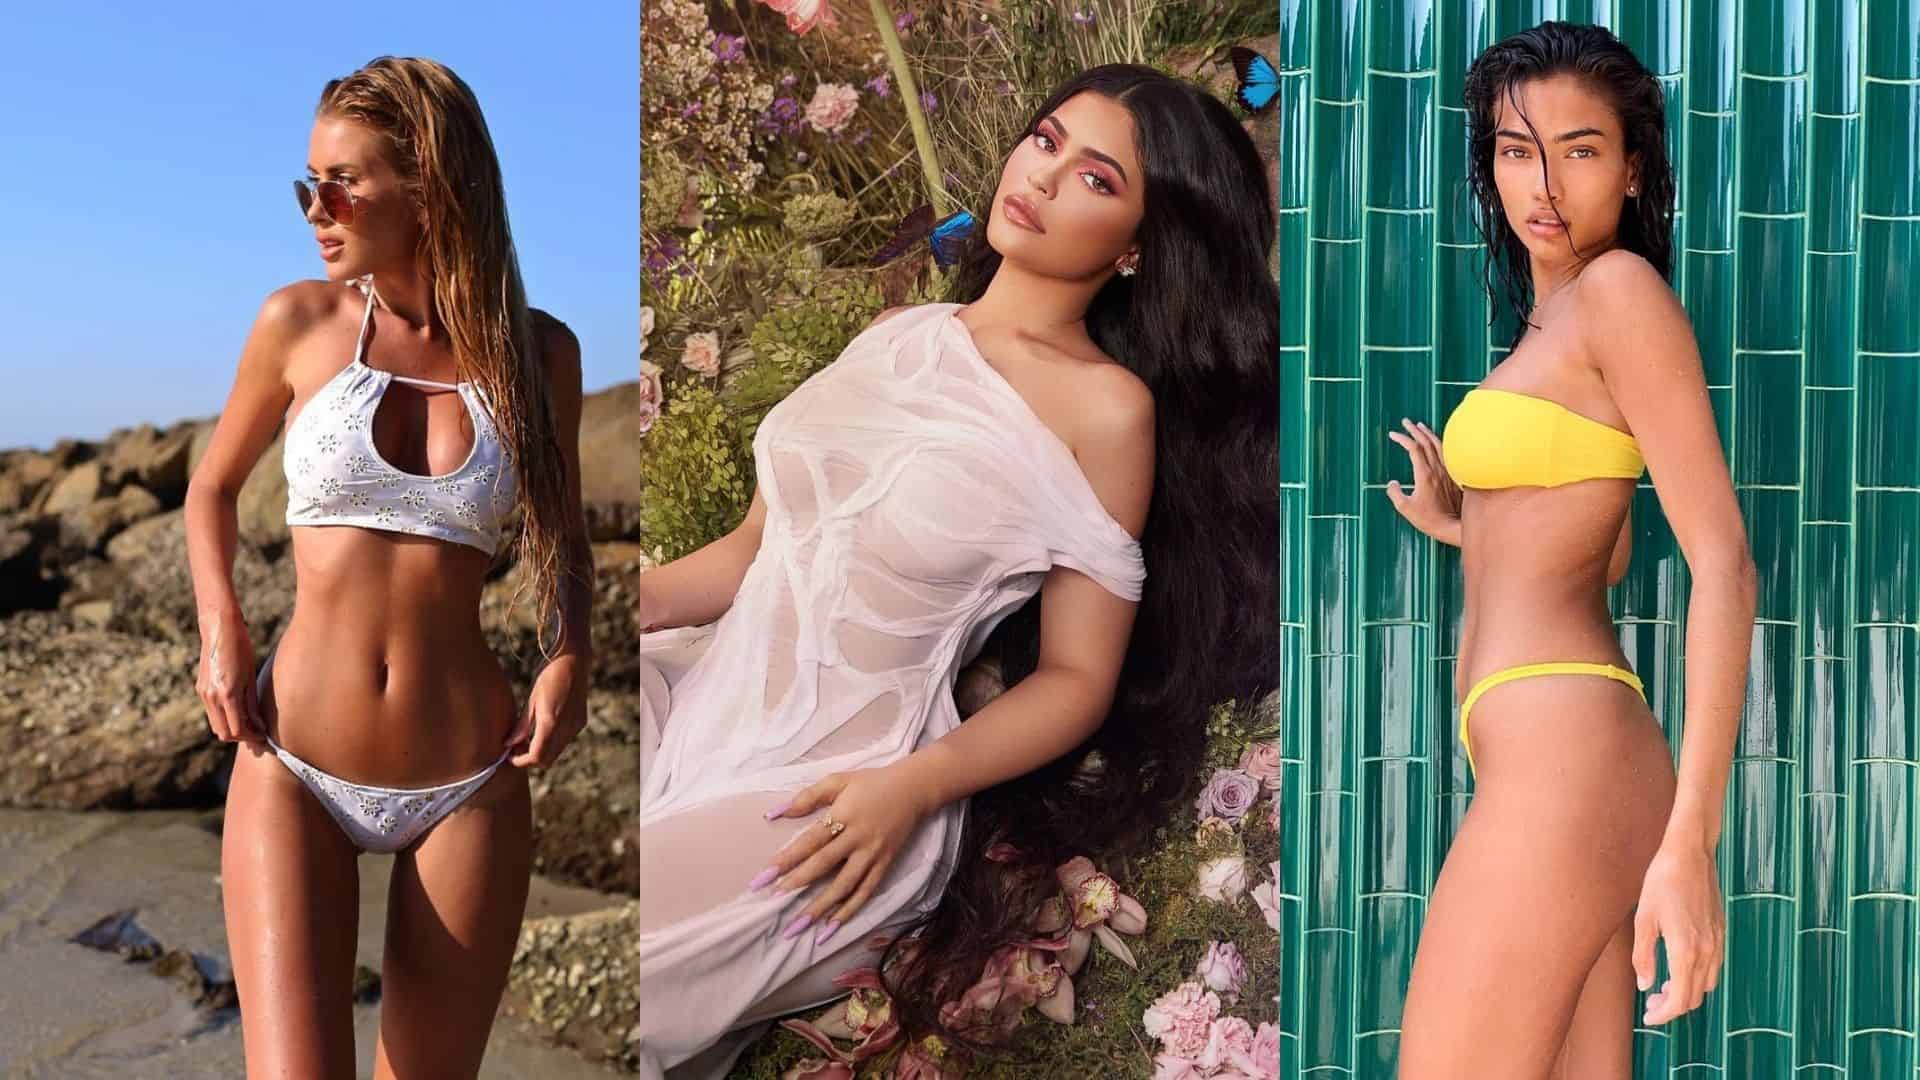 Top 10 Most Beautiful Hottest Instagram Models of 2022 - One Sports Live